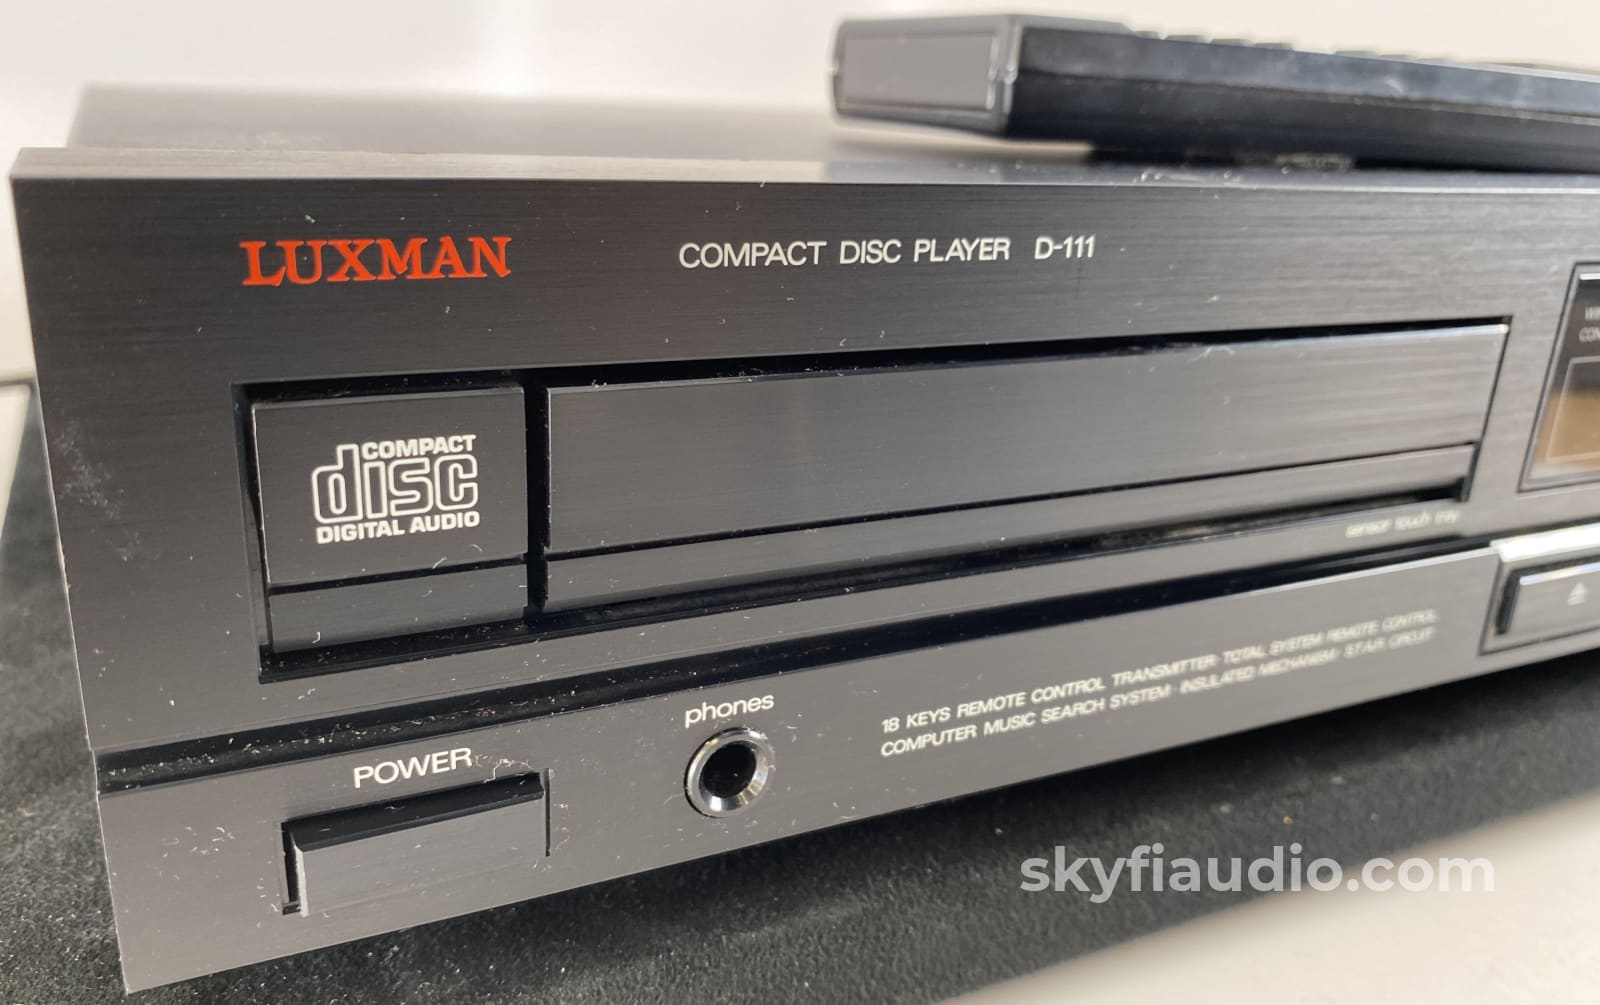 Luxman D-111 Vintage Cd Player With Remote - Dual D/A Converters + Digital